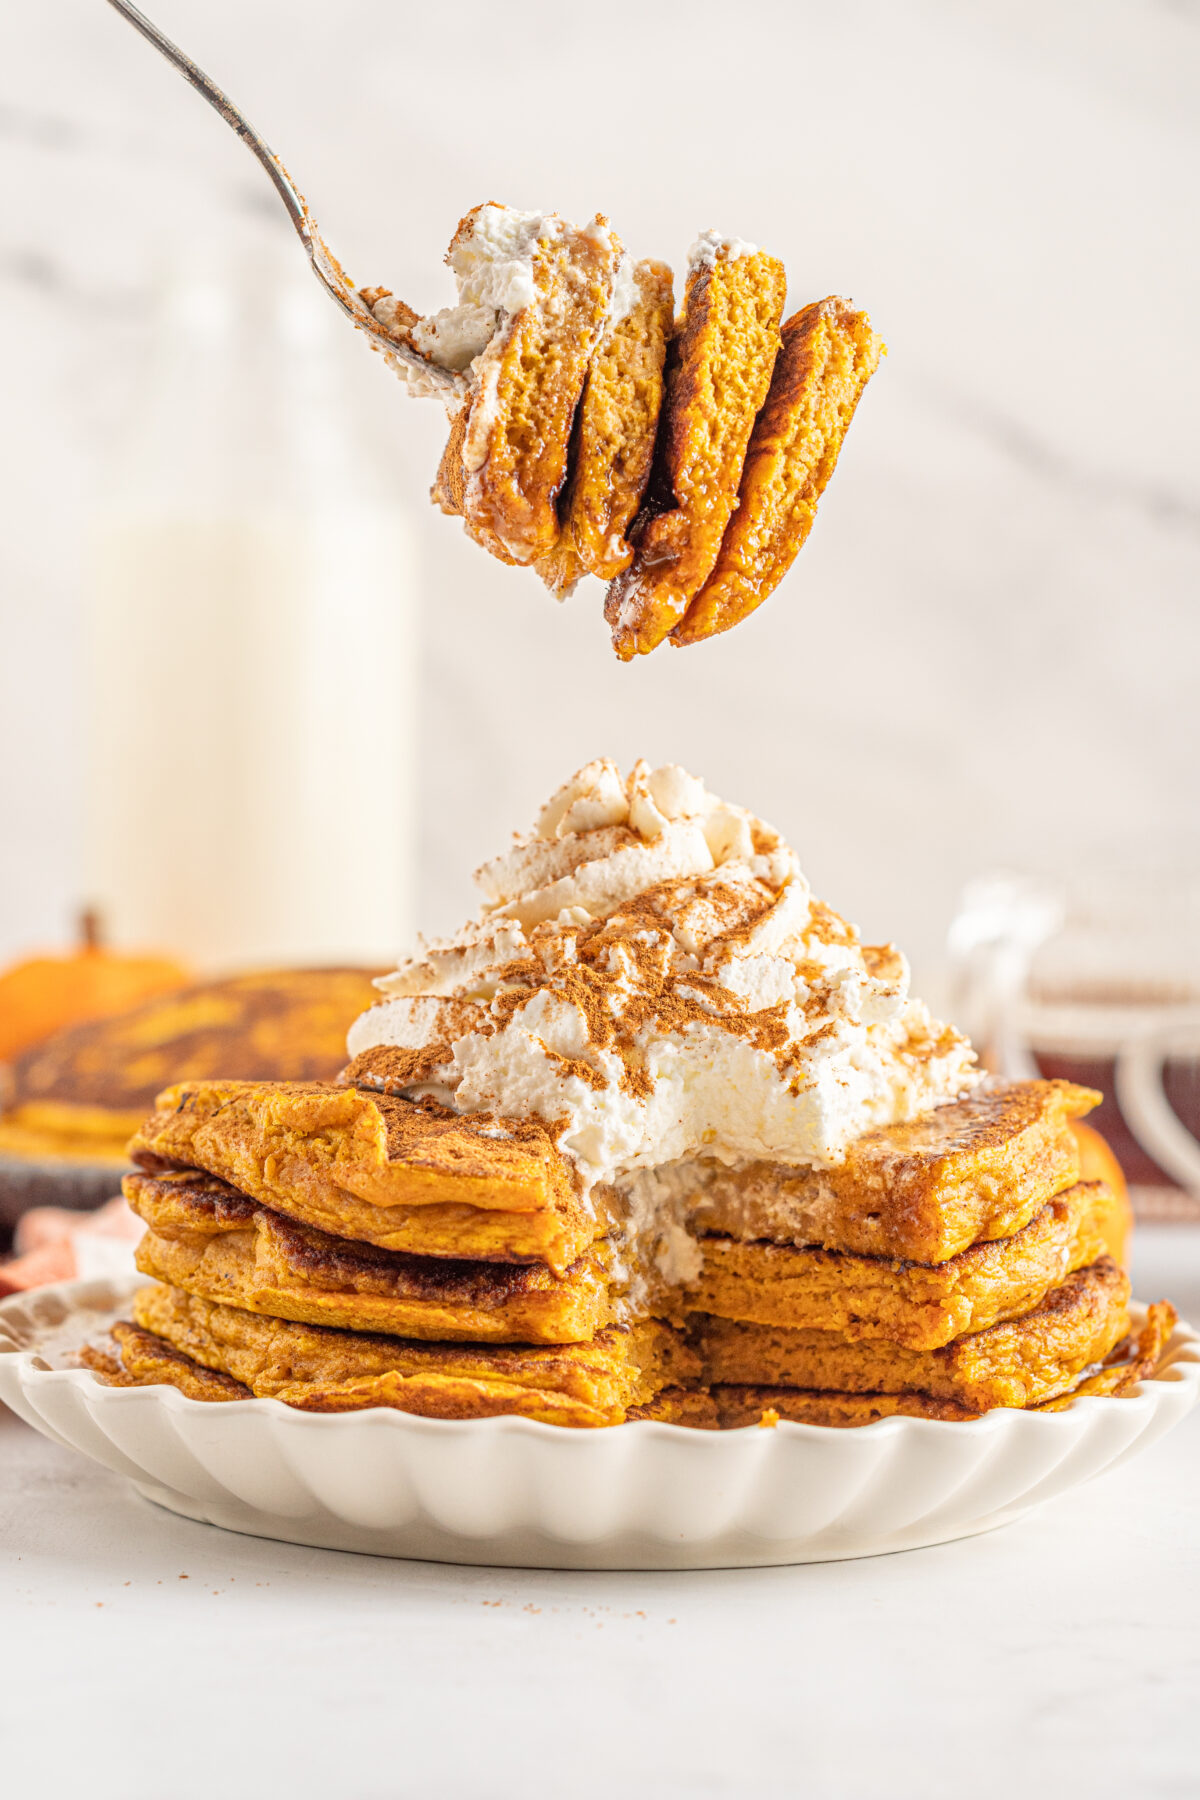 This easy pumpkin pancakes recipe uses real pumpkin, and has the perfect blend of warming spices for a delicious fall brunch or breakfast.